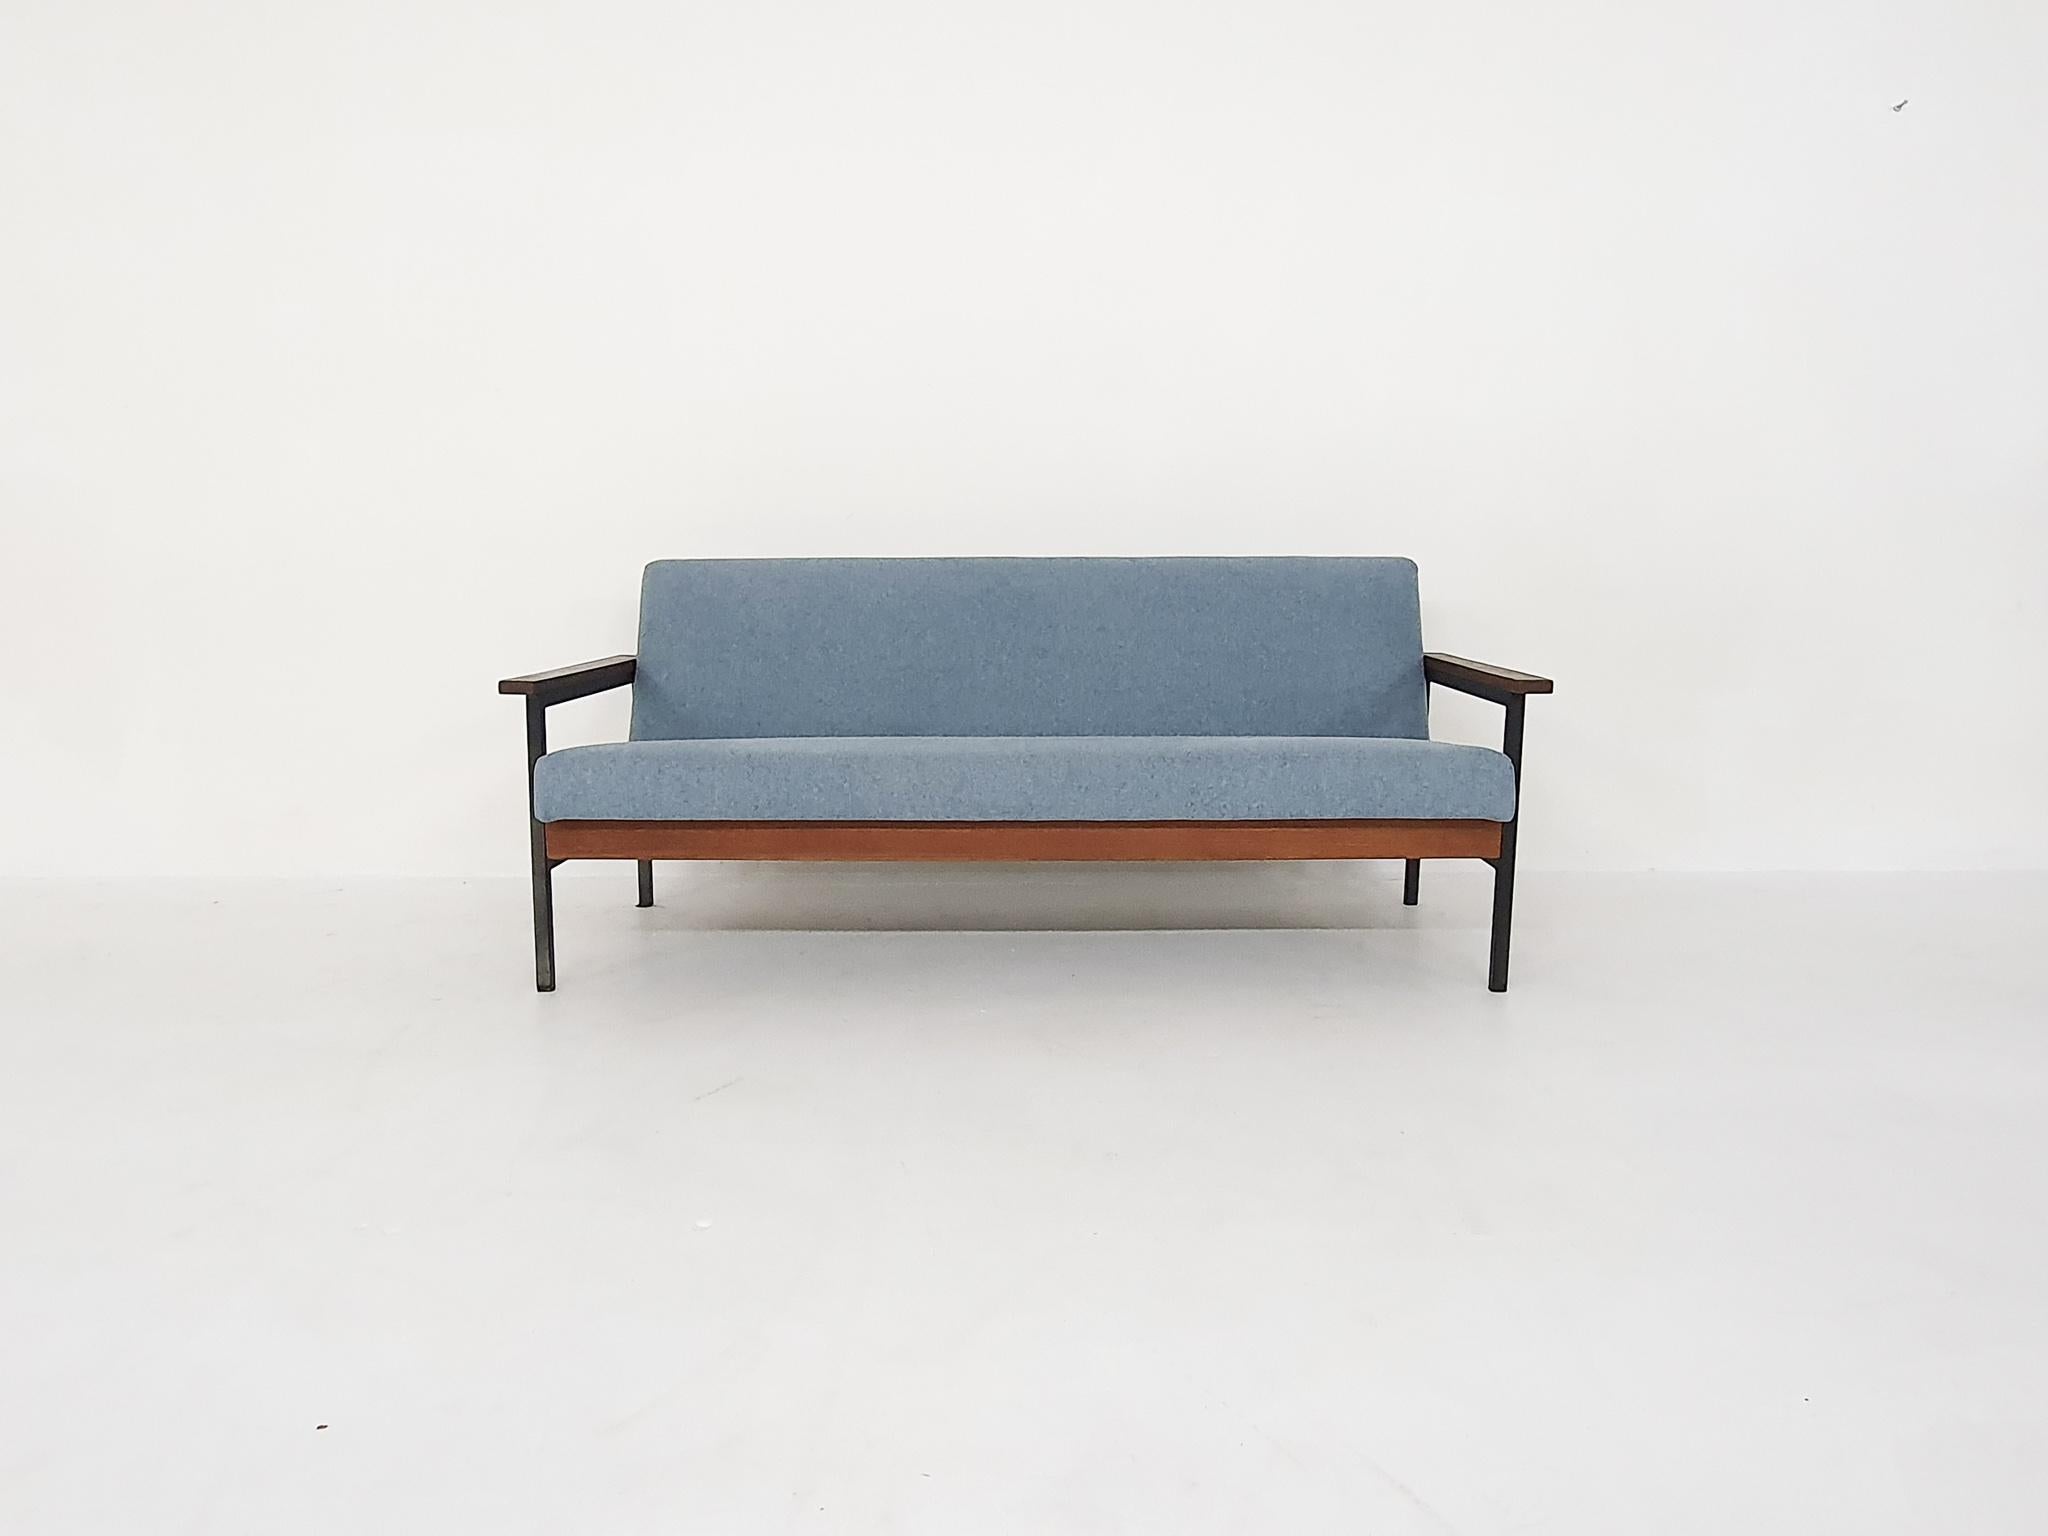 Nice minimalisitic sofa in the style of Rob Parry. Black metal frame with teak details and wenge wooden armrests.
Sofa is in good condition with new denim blue colored upholstery.